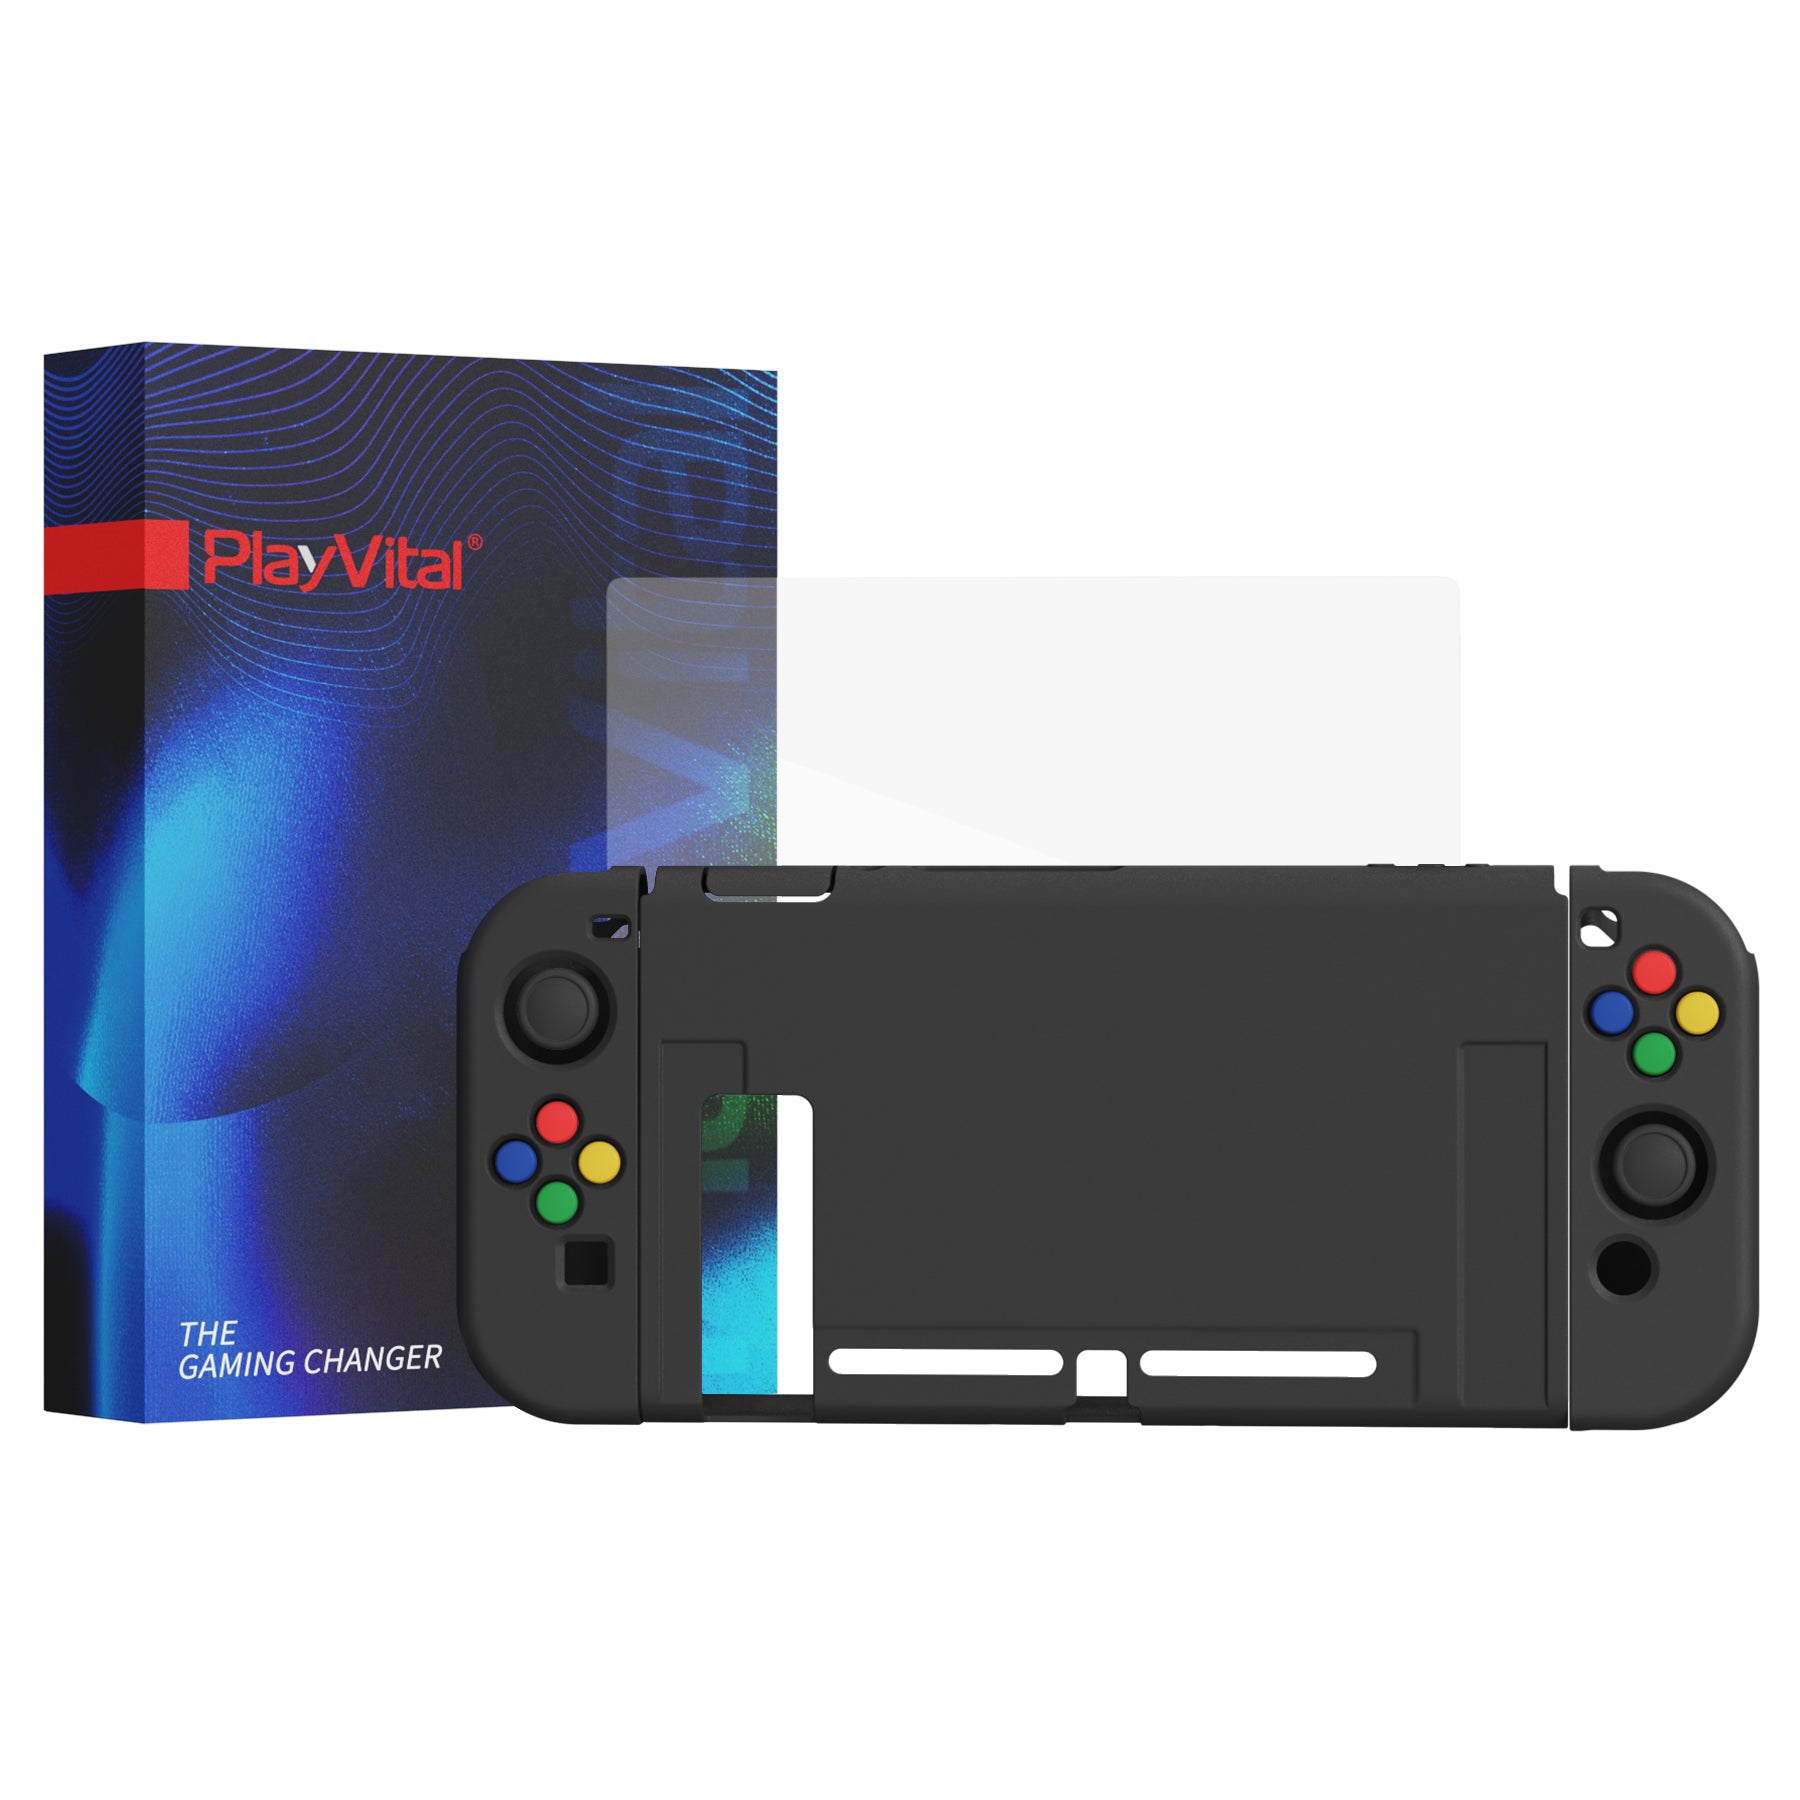 PlayVital ZealProtect Soft Protective Case for Nintendo Switch, Flexible Cover Protector for Nintendo Switch with Tempered Glass Screen Protector & Thumb Grip Caps & ABXY Direction Button Caps - Black - RNSYM5001 playvital